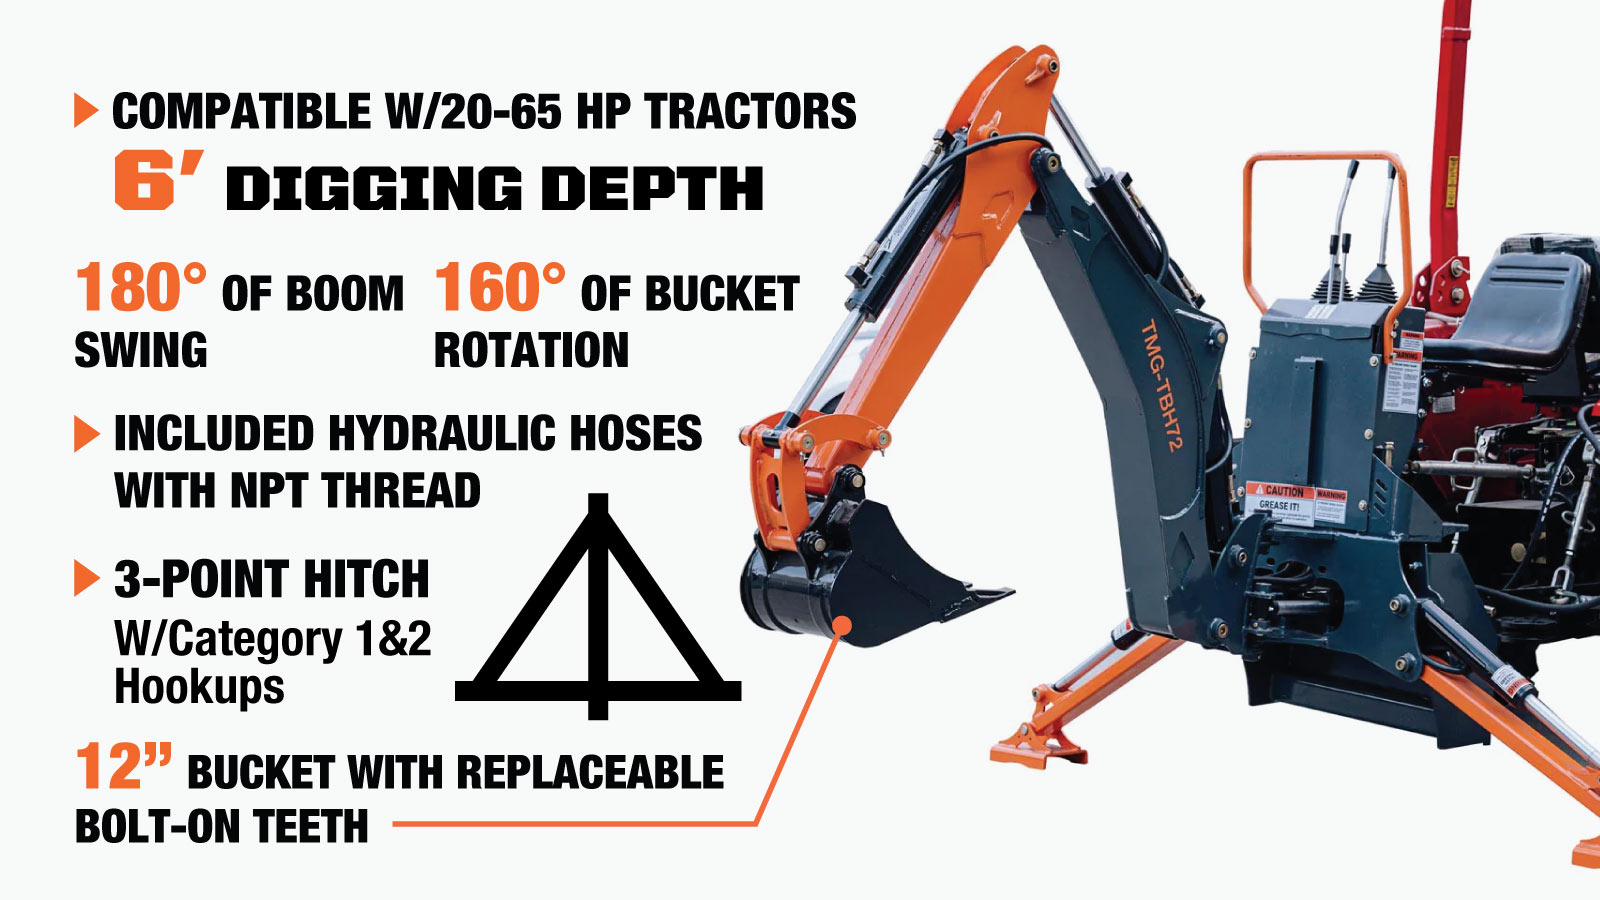 TMG Industrial 6-FT 3-Point Hitch Swing Backhoe Attachment, 12” Bucket Included, 20-65 HP Tractor, 114” High Reach, Category 1 & 2 Hookups, TMG-TBH72-description-image